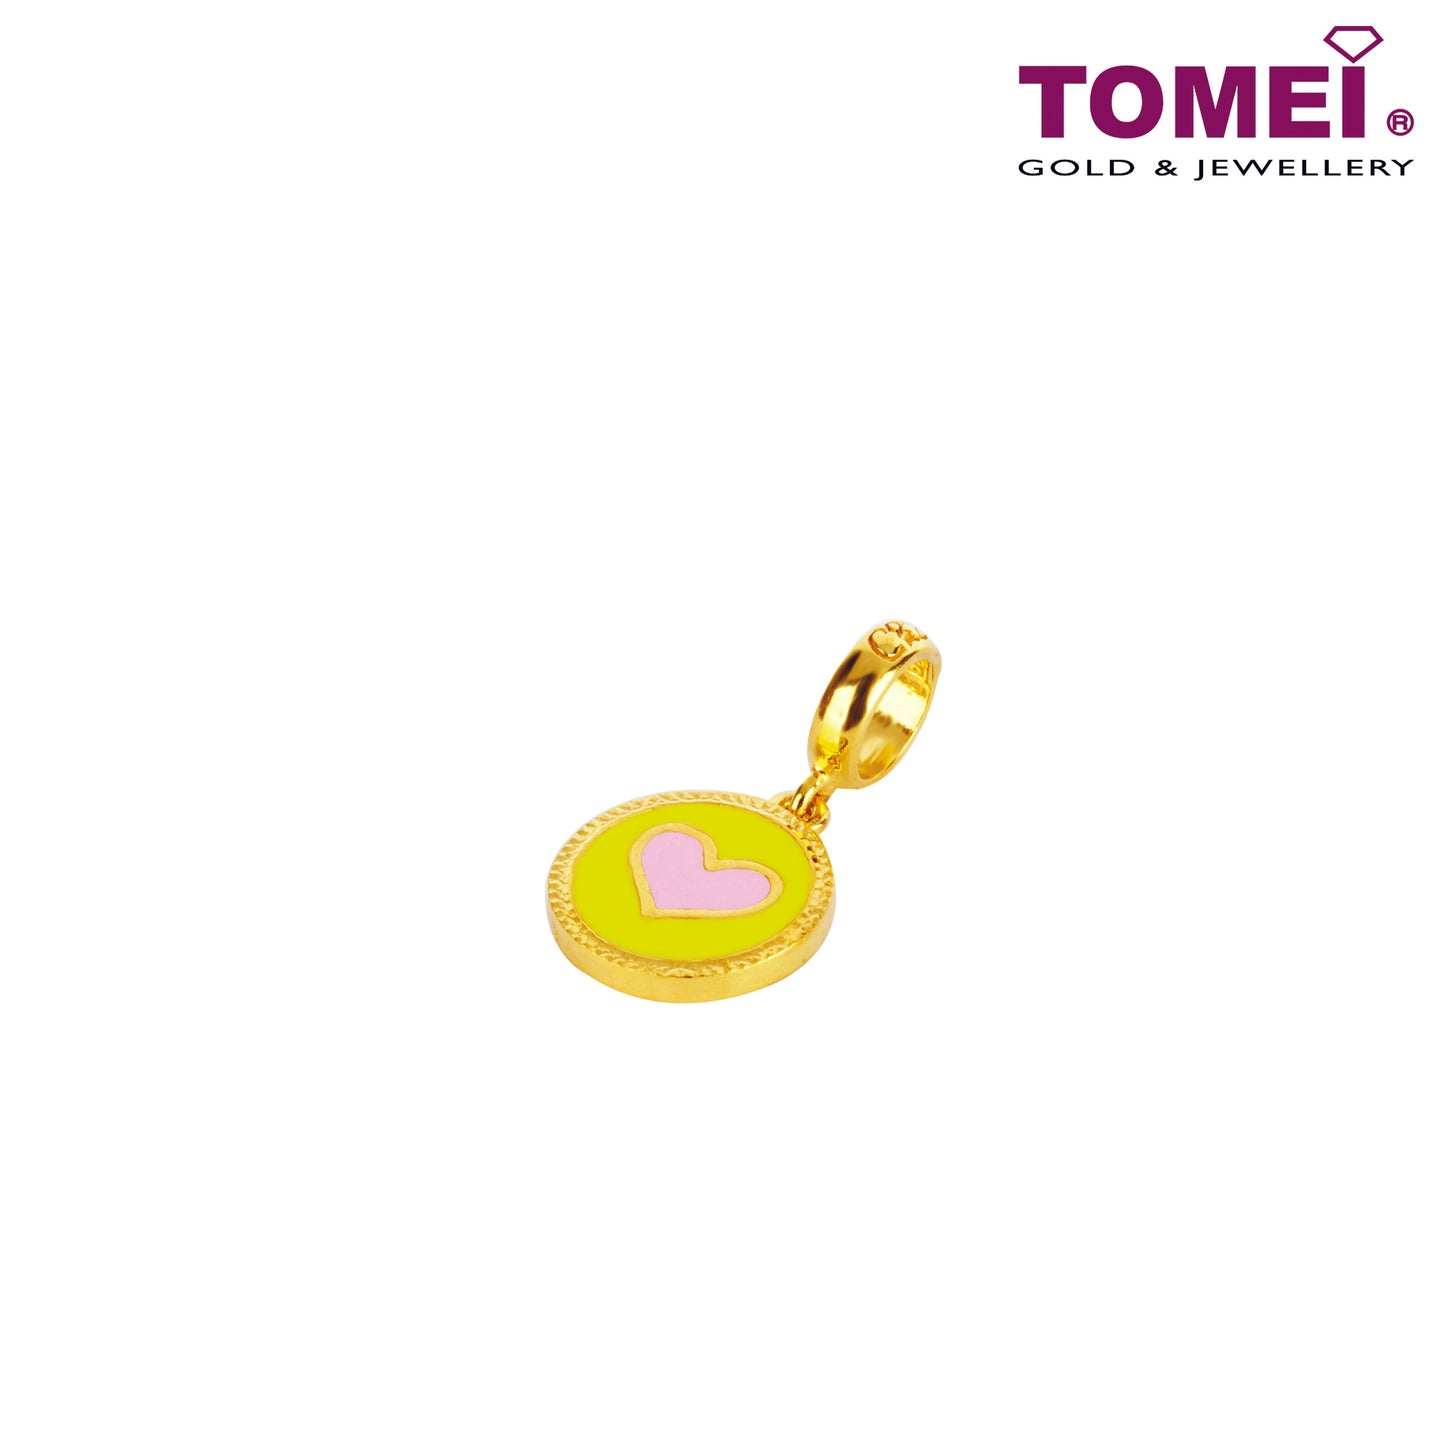 TOMEI Love Medal Charm, Yellow Gold 916